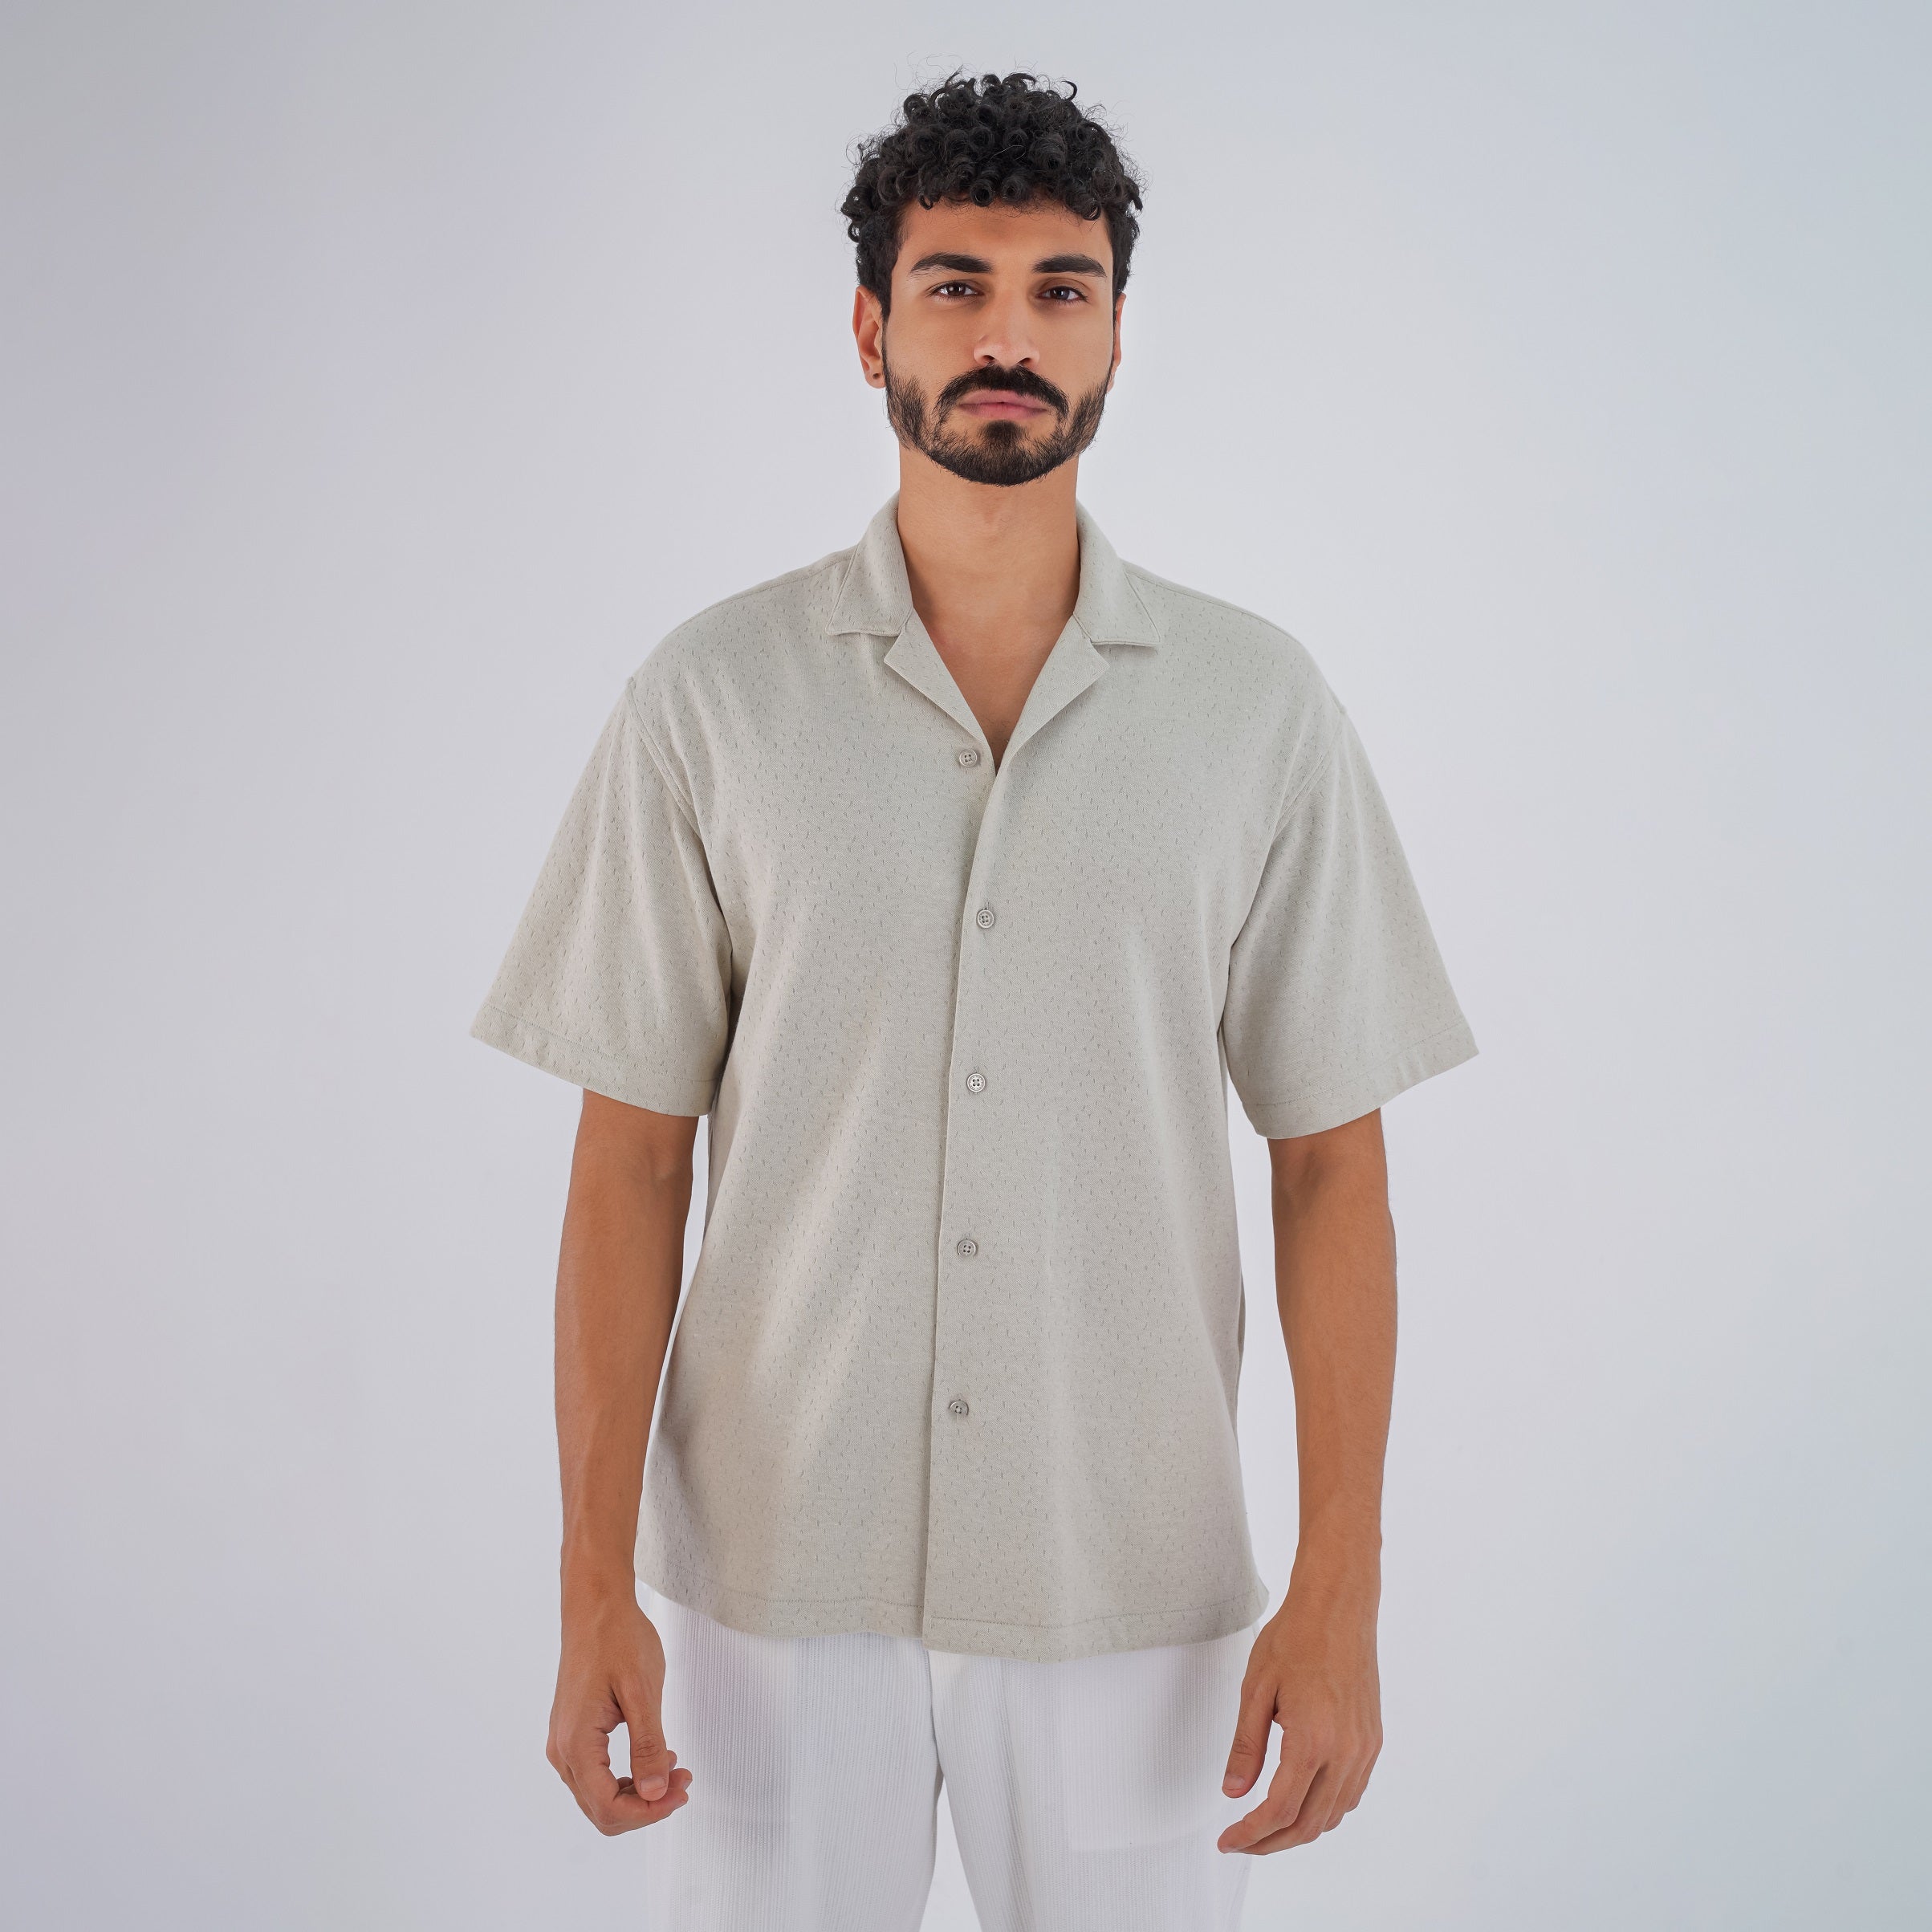 M24SN150 -Casual short sleeve cotton Shirt, Camp collar and Relaxed fit